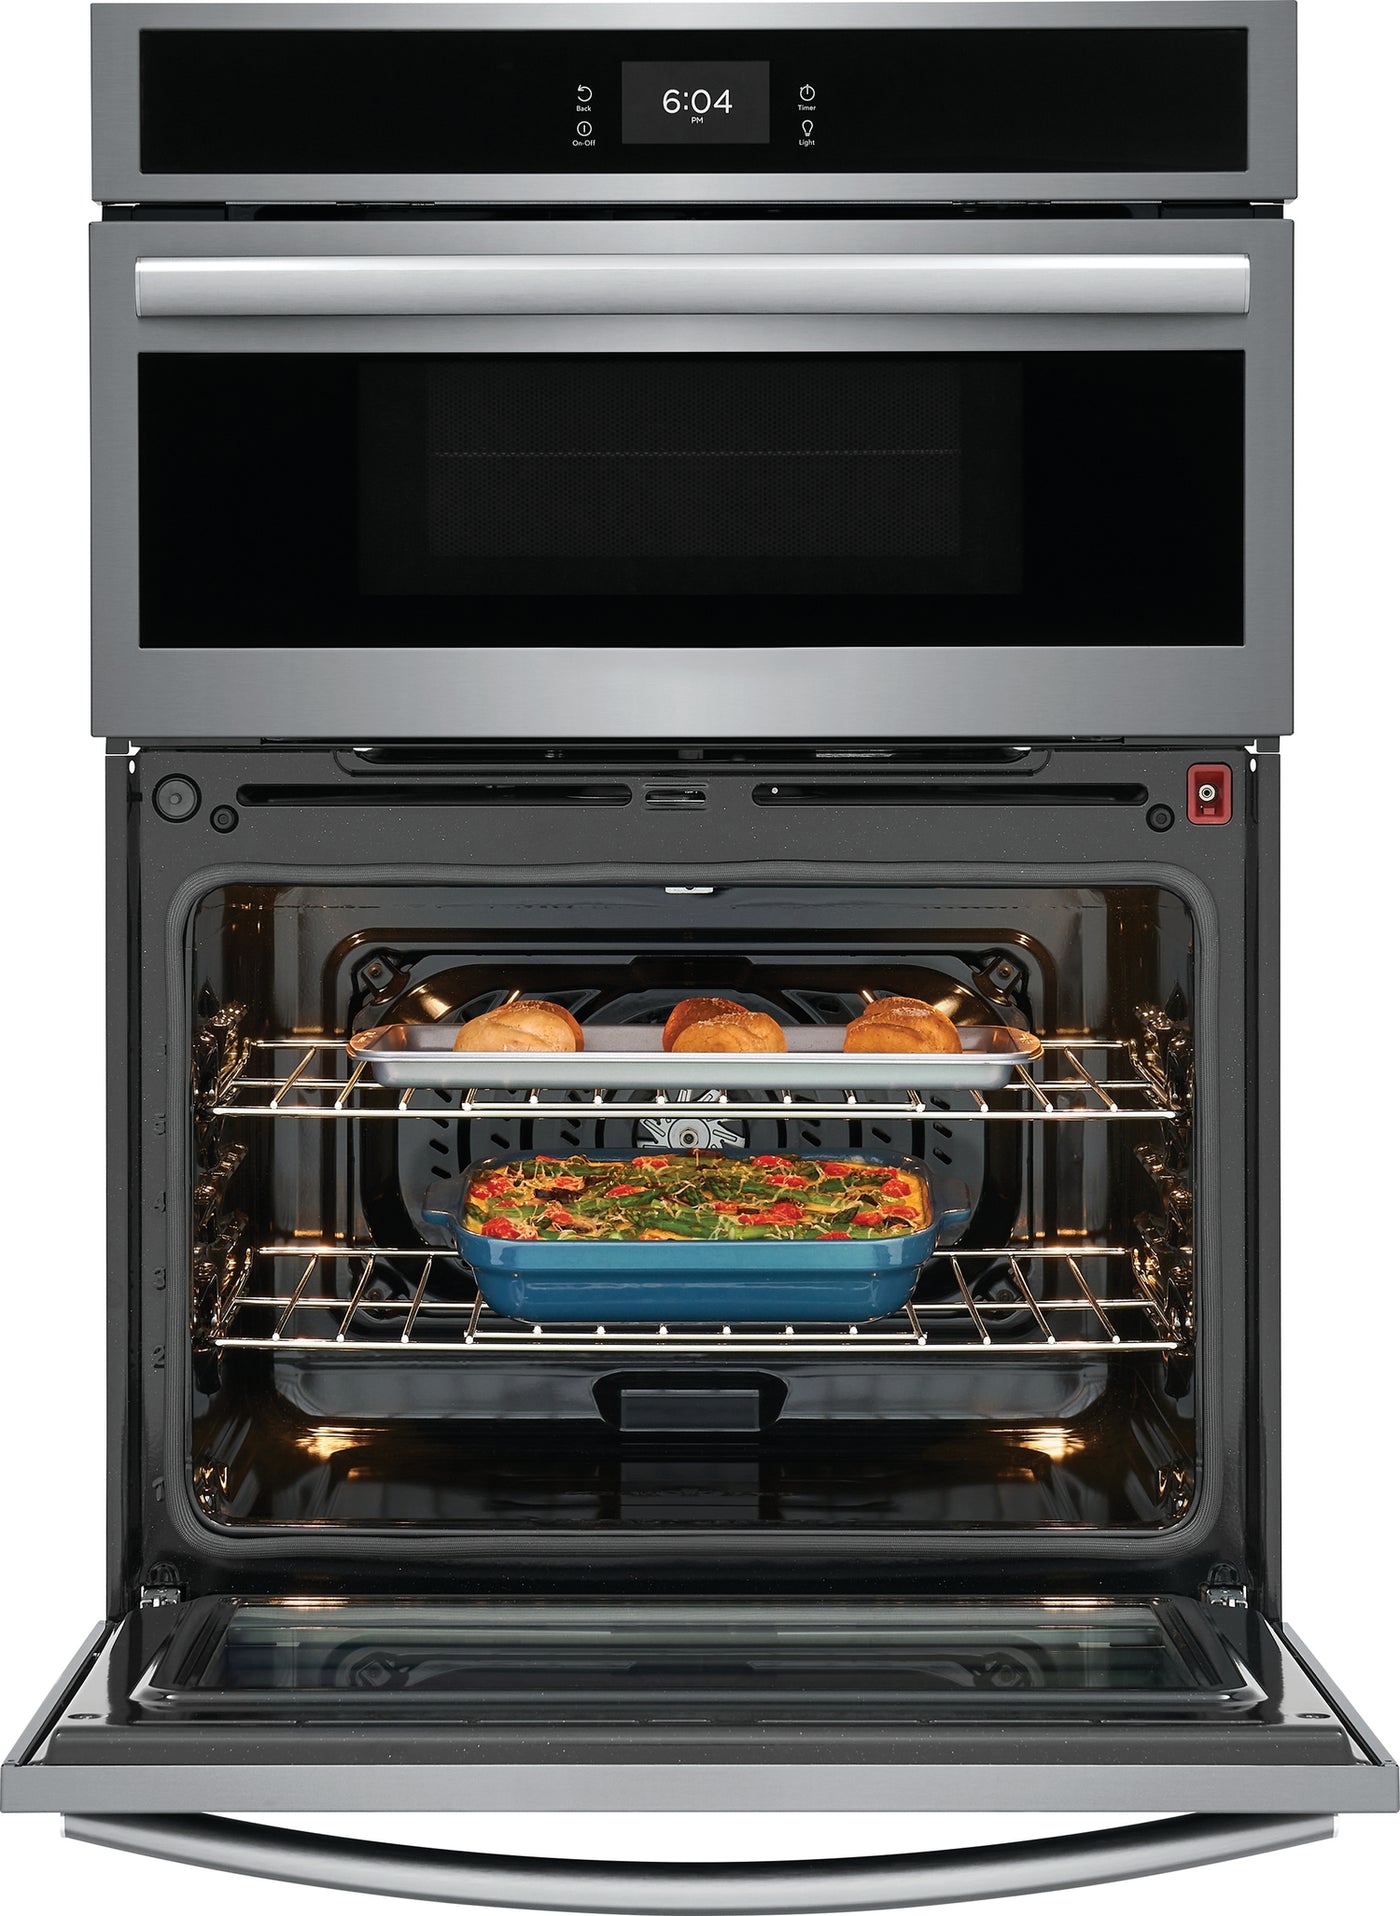 Frigidaire Gallery Smudge-Proof Stainless Steel 30" Wall Oven and Microwave Combination (1.7 Cu. Ft. / 5.3 Cu. Ft.) - GCWM3067AF